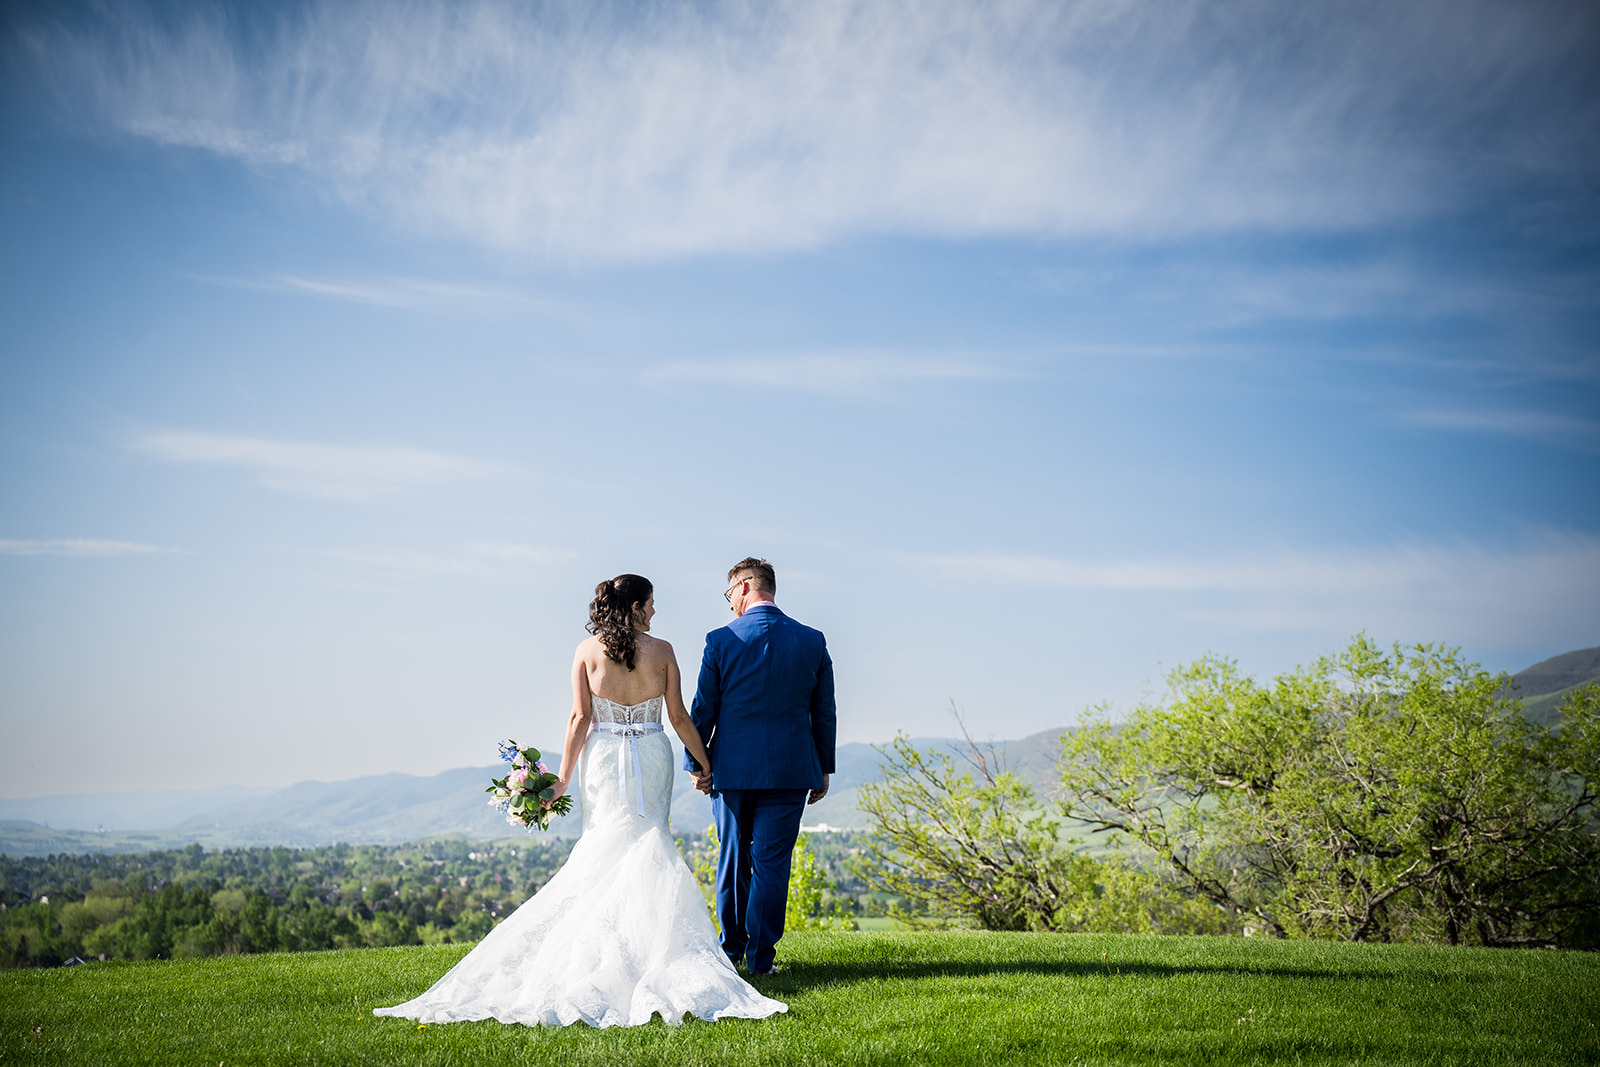 Bride and groom walk away from the camera hand-in-hand through a grassy field with blue skies.